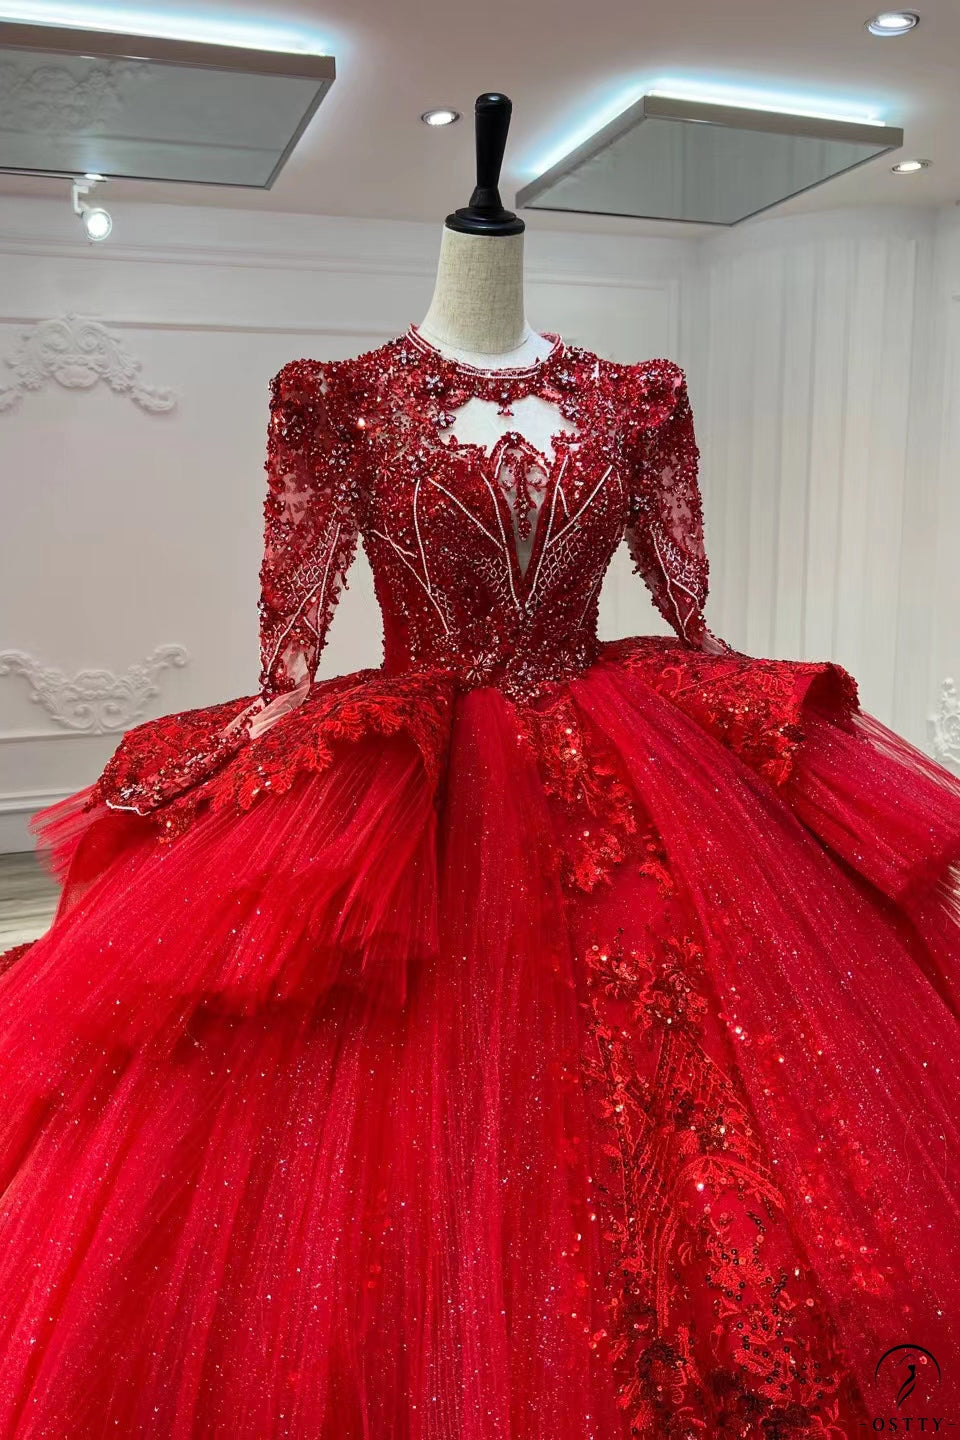 Red Luxury Long Sleeves beads Ball Gown Wedding Dress - $1,499.99